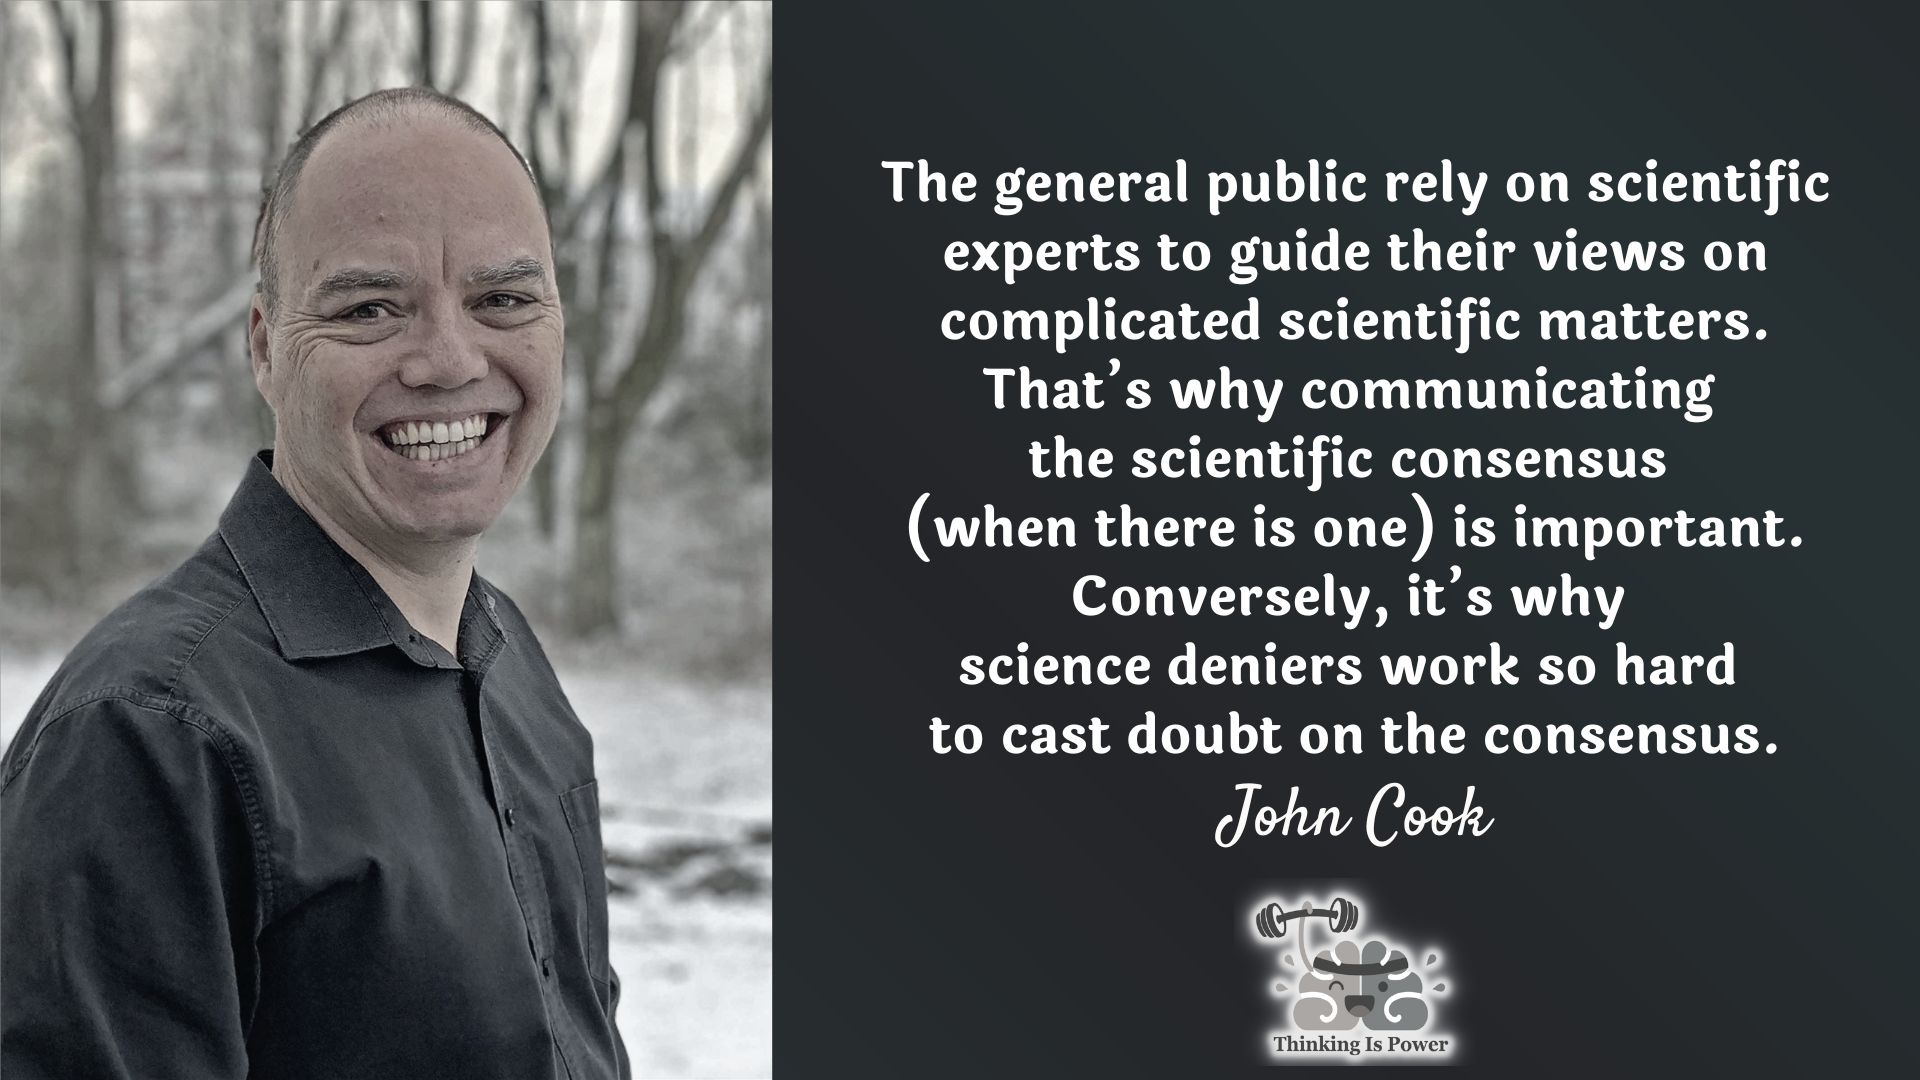 John Cook: The general public rely on scientific experts to guide their views on complicated scientific matters. That’s why communicating the scientific consensus (when there is one) is important. Conversely, it’s why science deniers work so hard to cast doubt on the consensus.